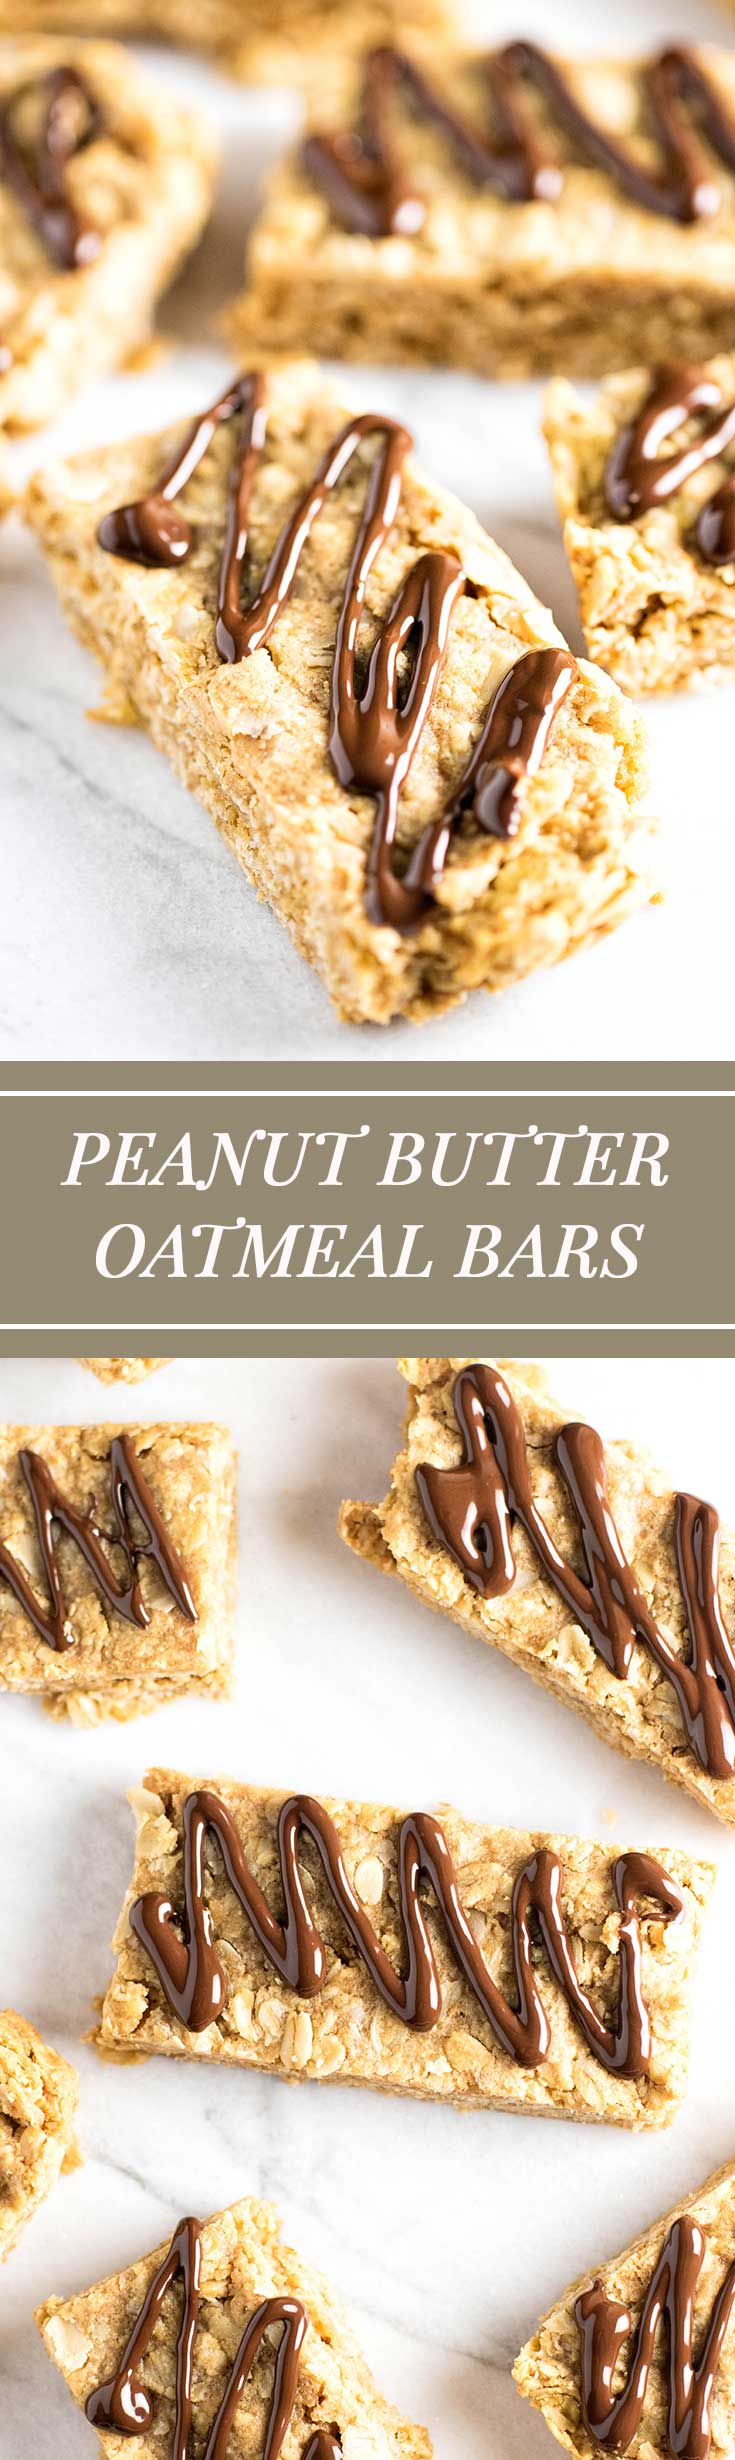 Easy peanut butter oatmeal bars with a dark chocolate drizzle | girlgonegourmet.com